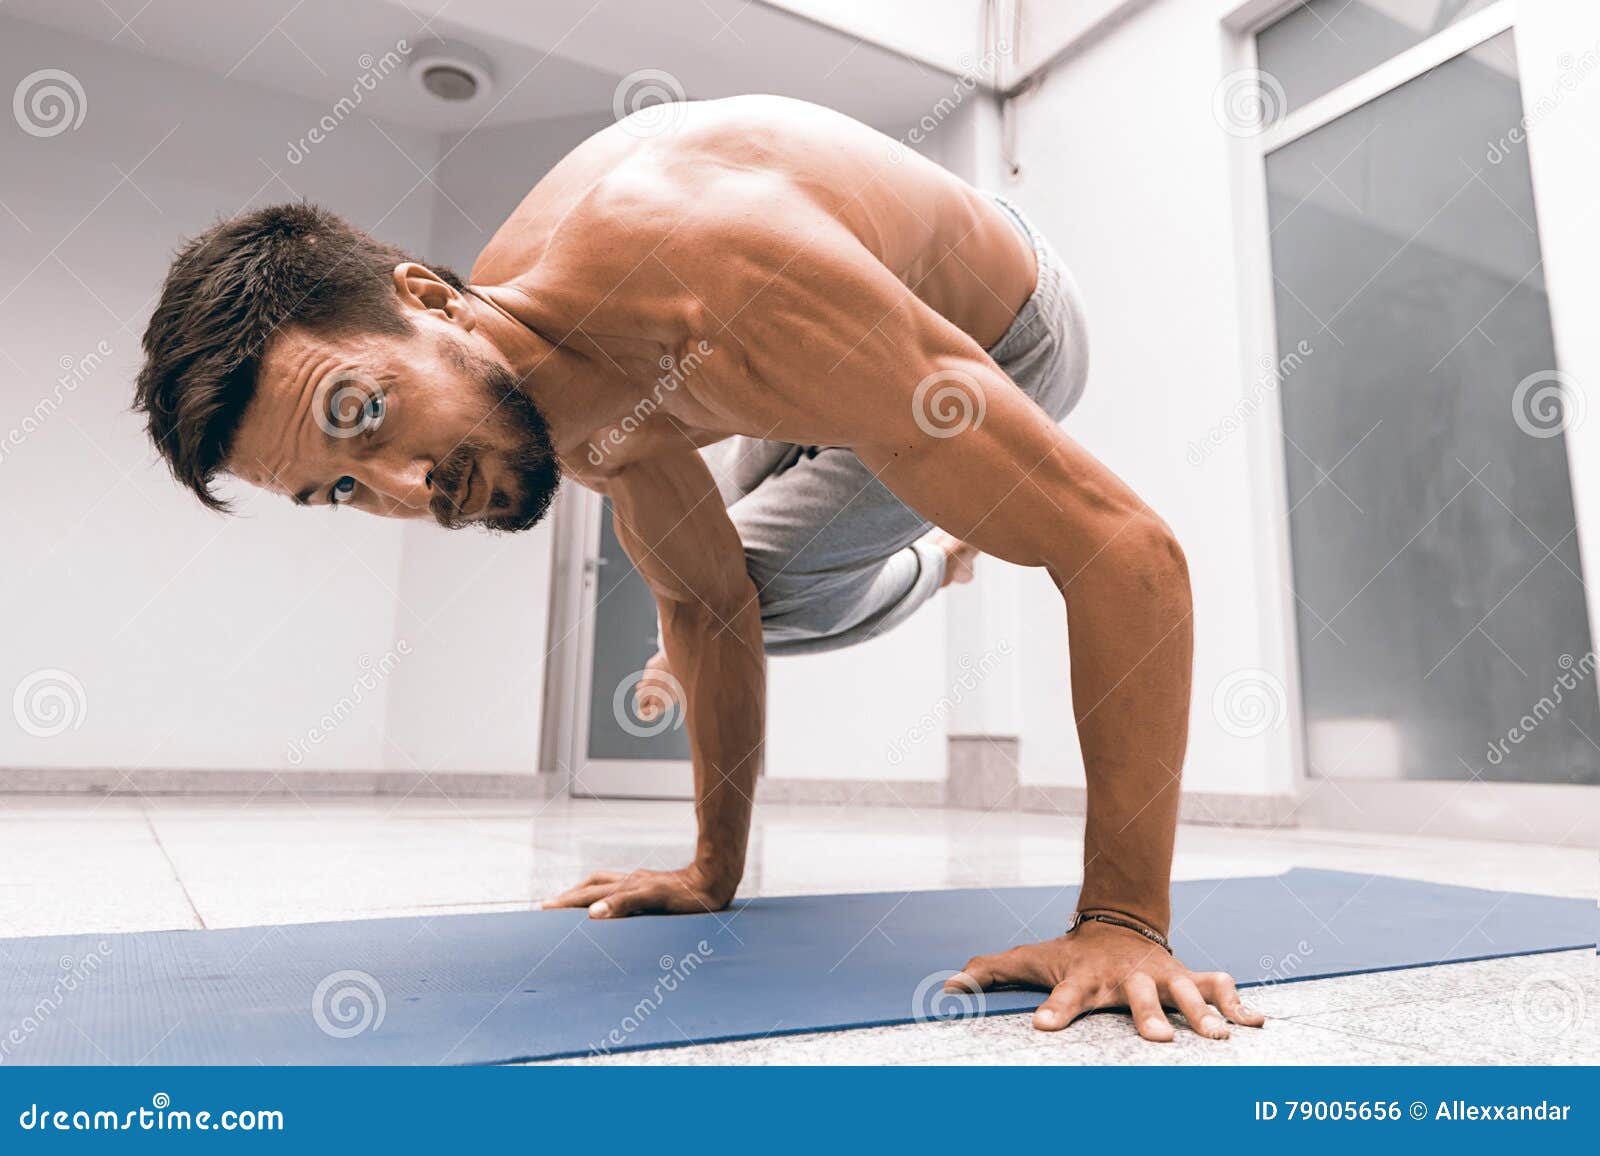 Athletic Strong Man Practicing Difficult Yoga Pose. Stock Photo